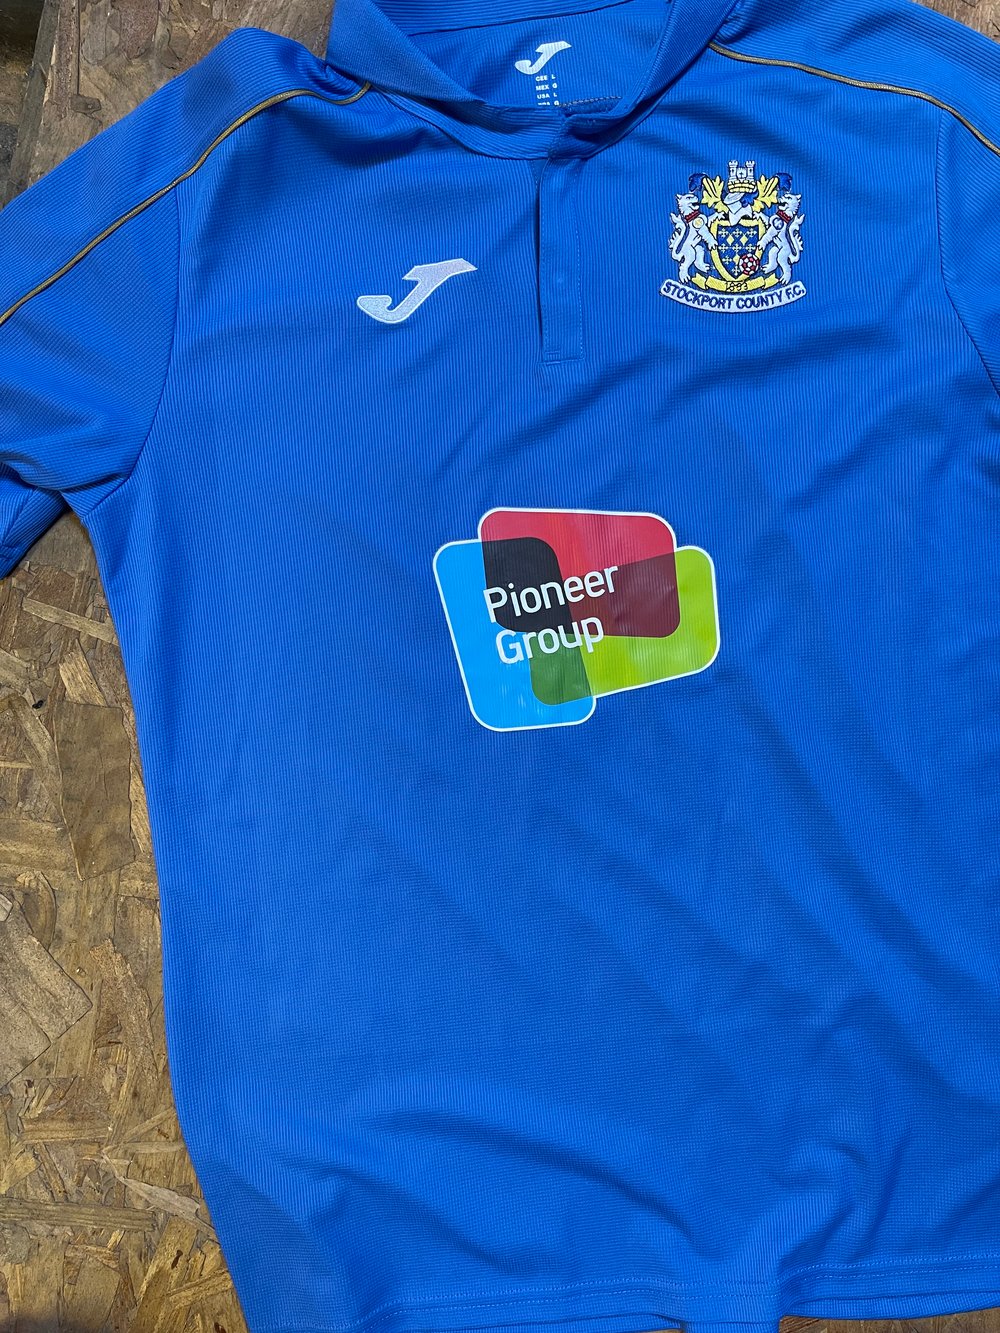 Player Issue 2019/20 Joma Home Shirt